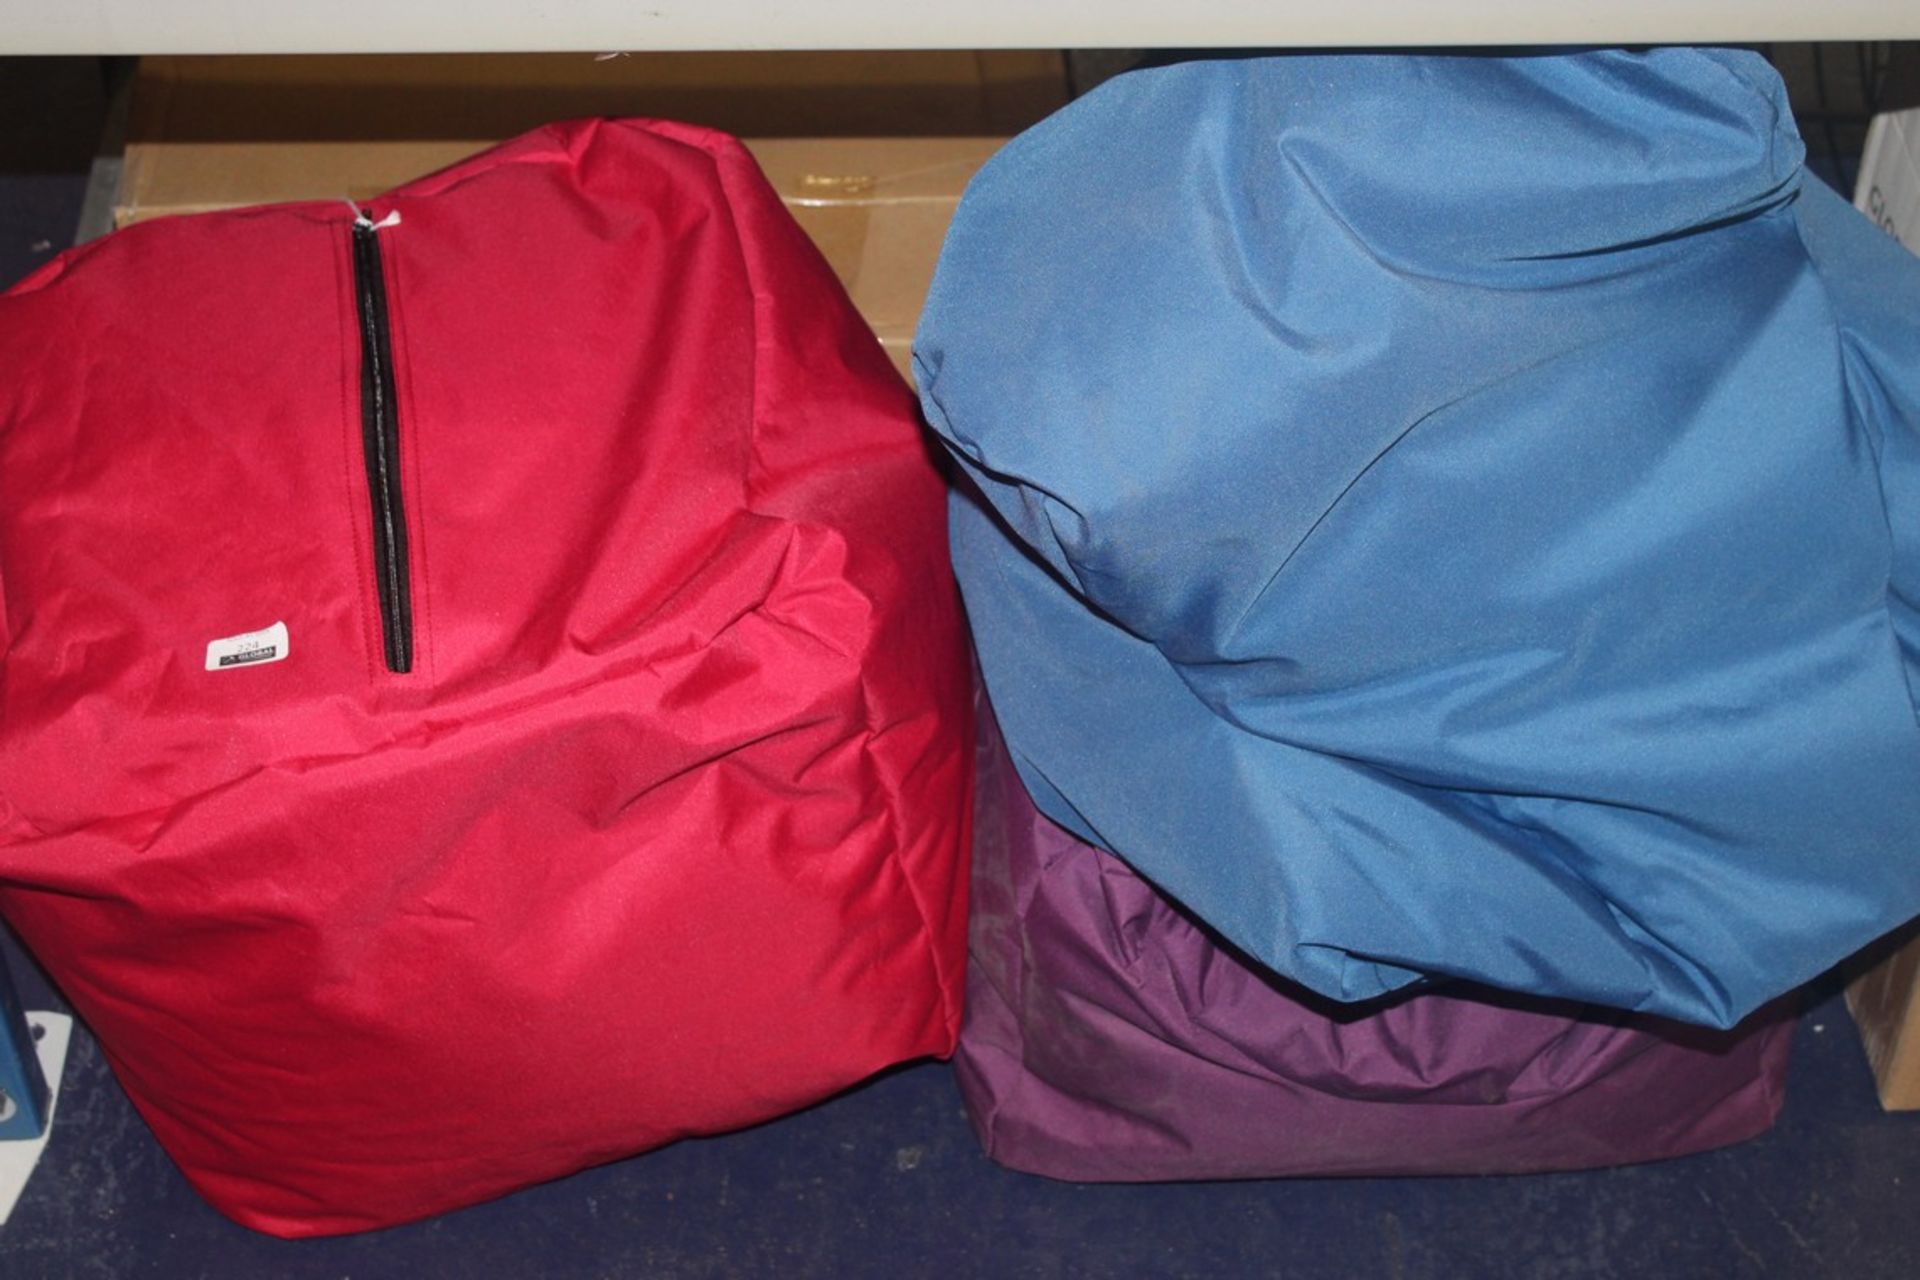 Lot To Contain 3 Assorted Children's Bean Bag Chairs Combined RRP £90 (Pictures Are For Illustration